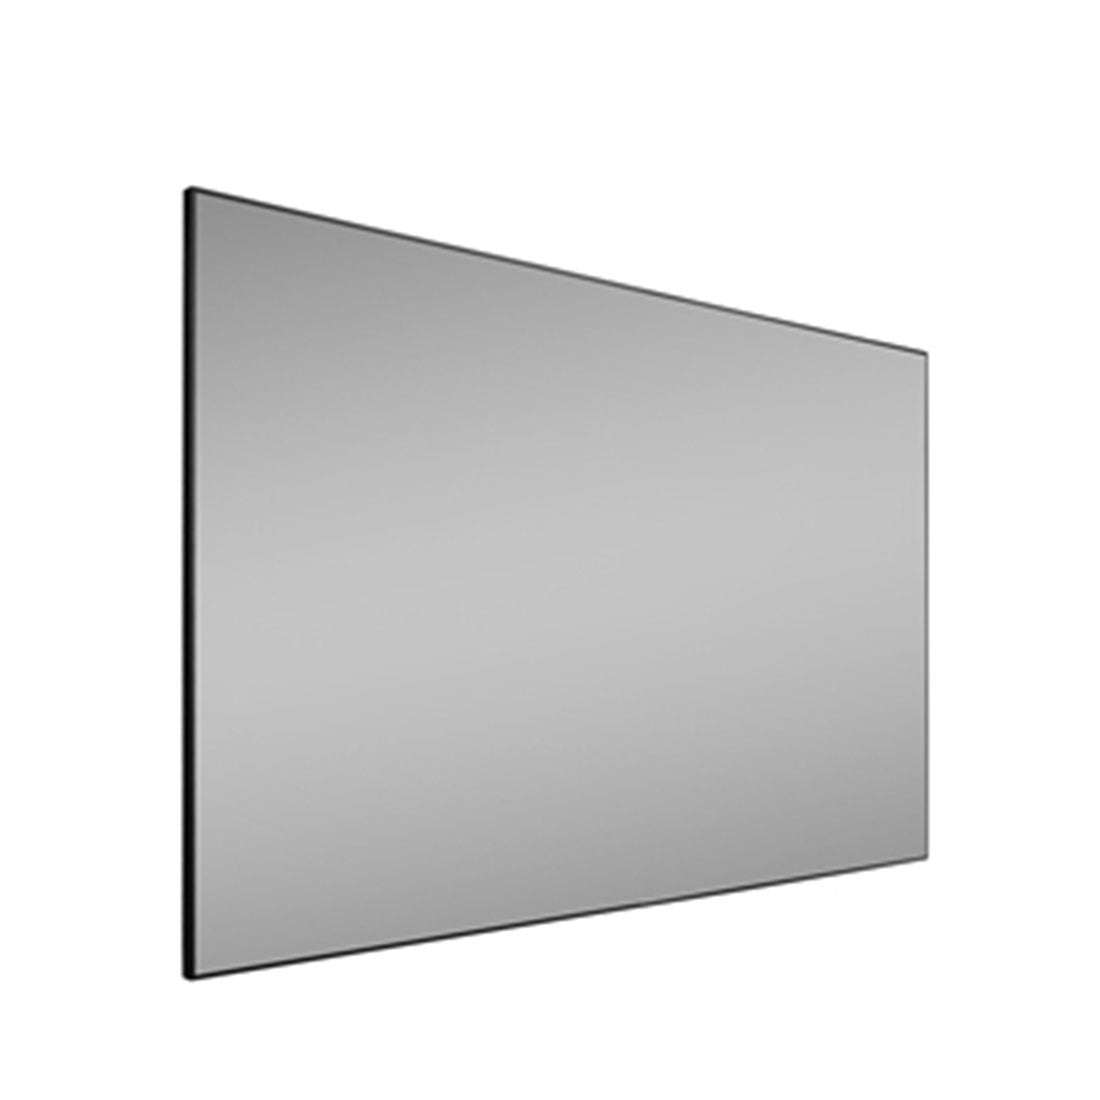 Grandview PE-L 100" Ambient Light Rejection Fixed Frame Projector Screen